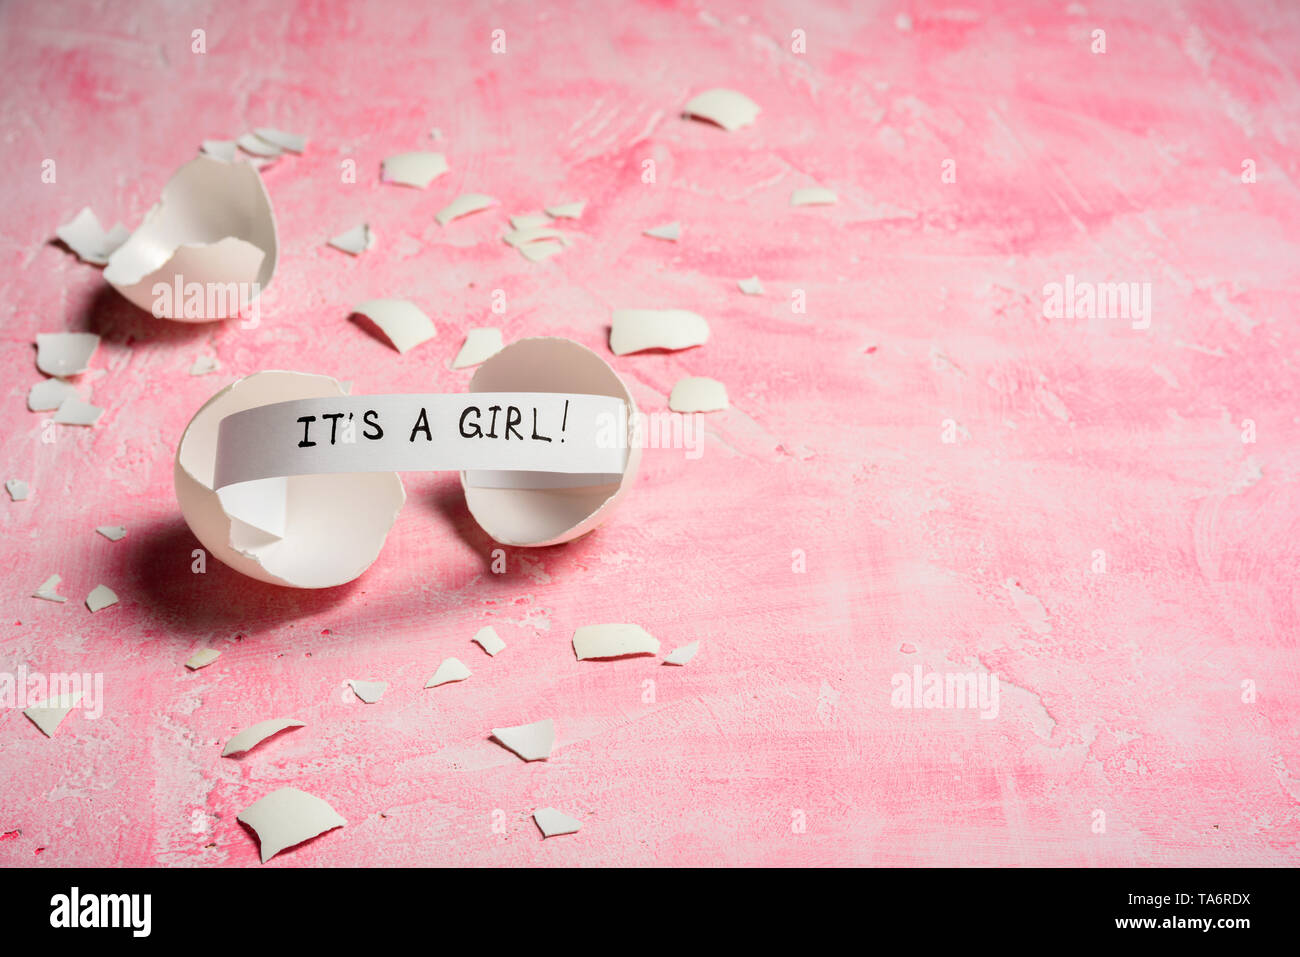 Baby shower concept. Girl, pink. Cracked egg with a message IT'S A GIRL. Like fortune cookies Stock Photo